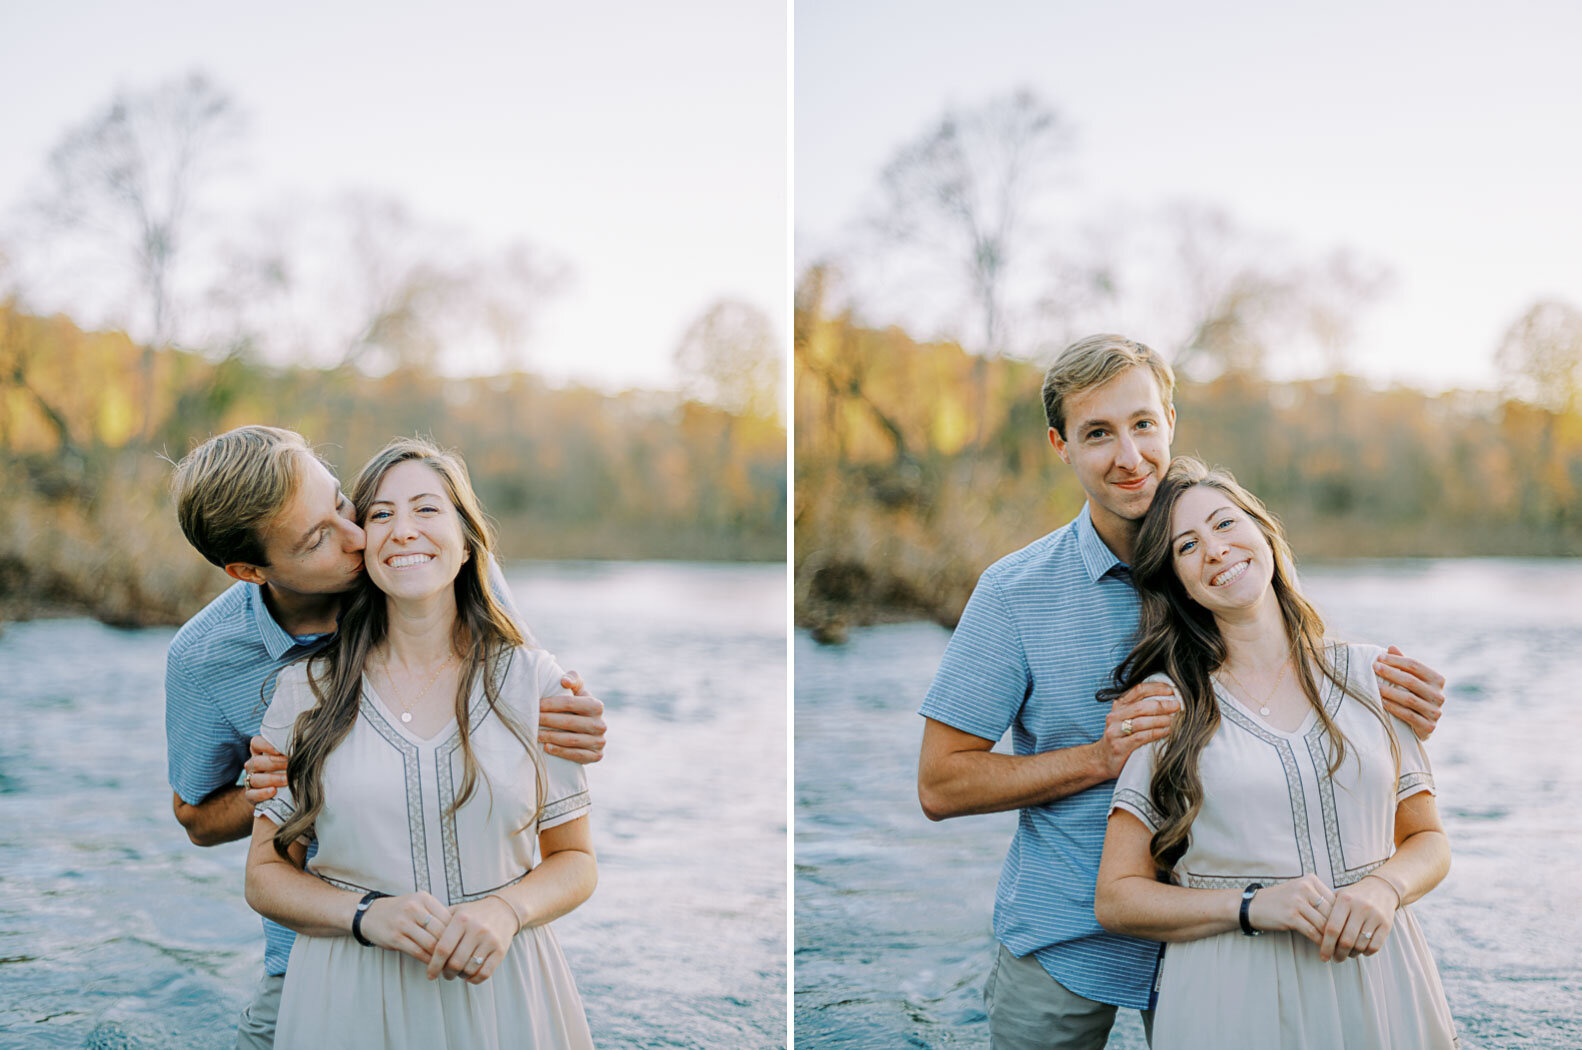 man-kissing-woman's-cheek-in-rivanna-river-during-fall-engagement-session-charlottesville-virginia.jpg